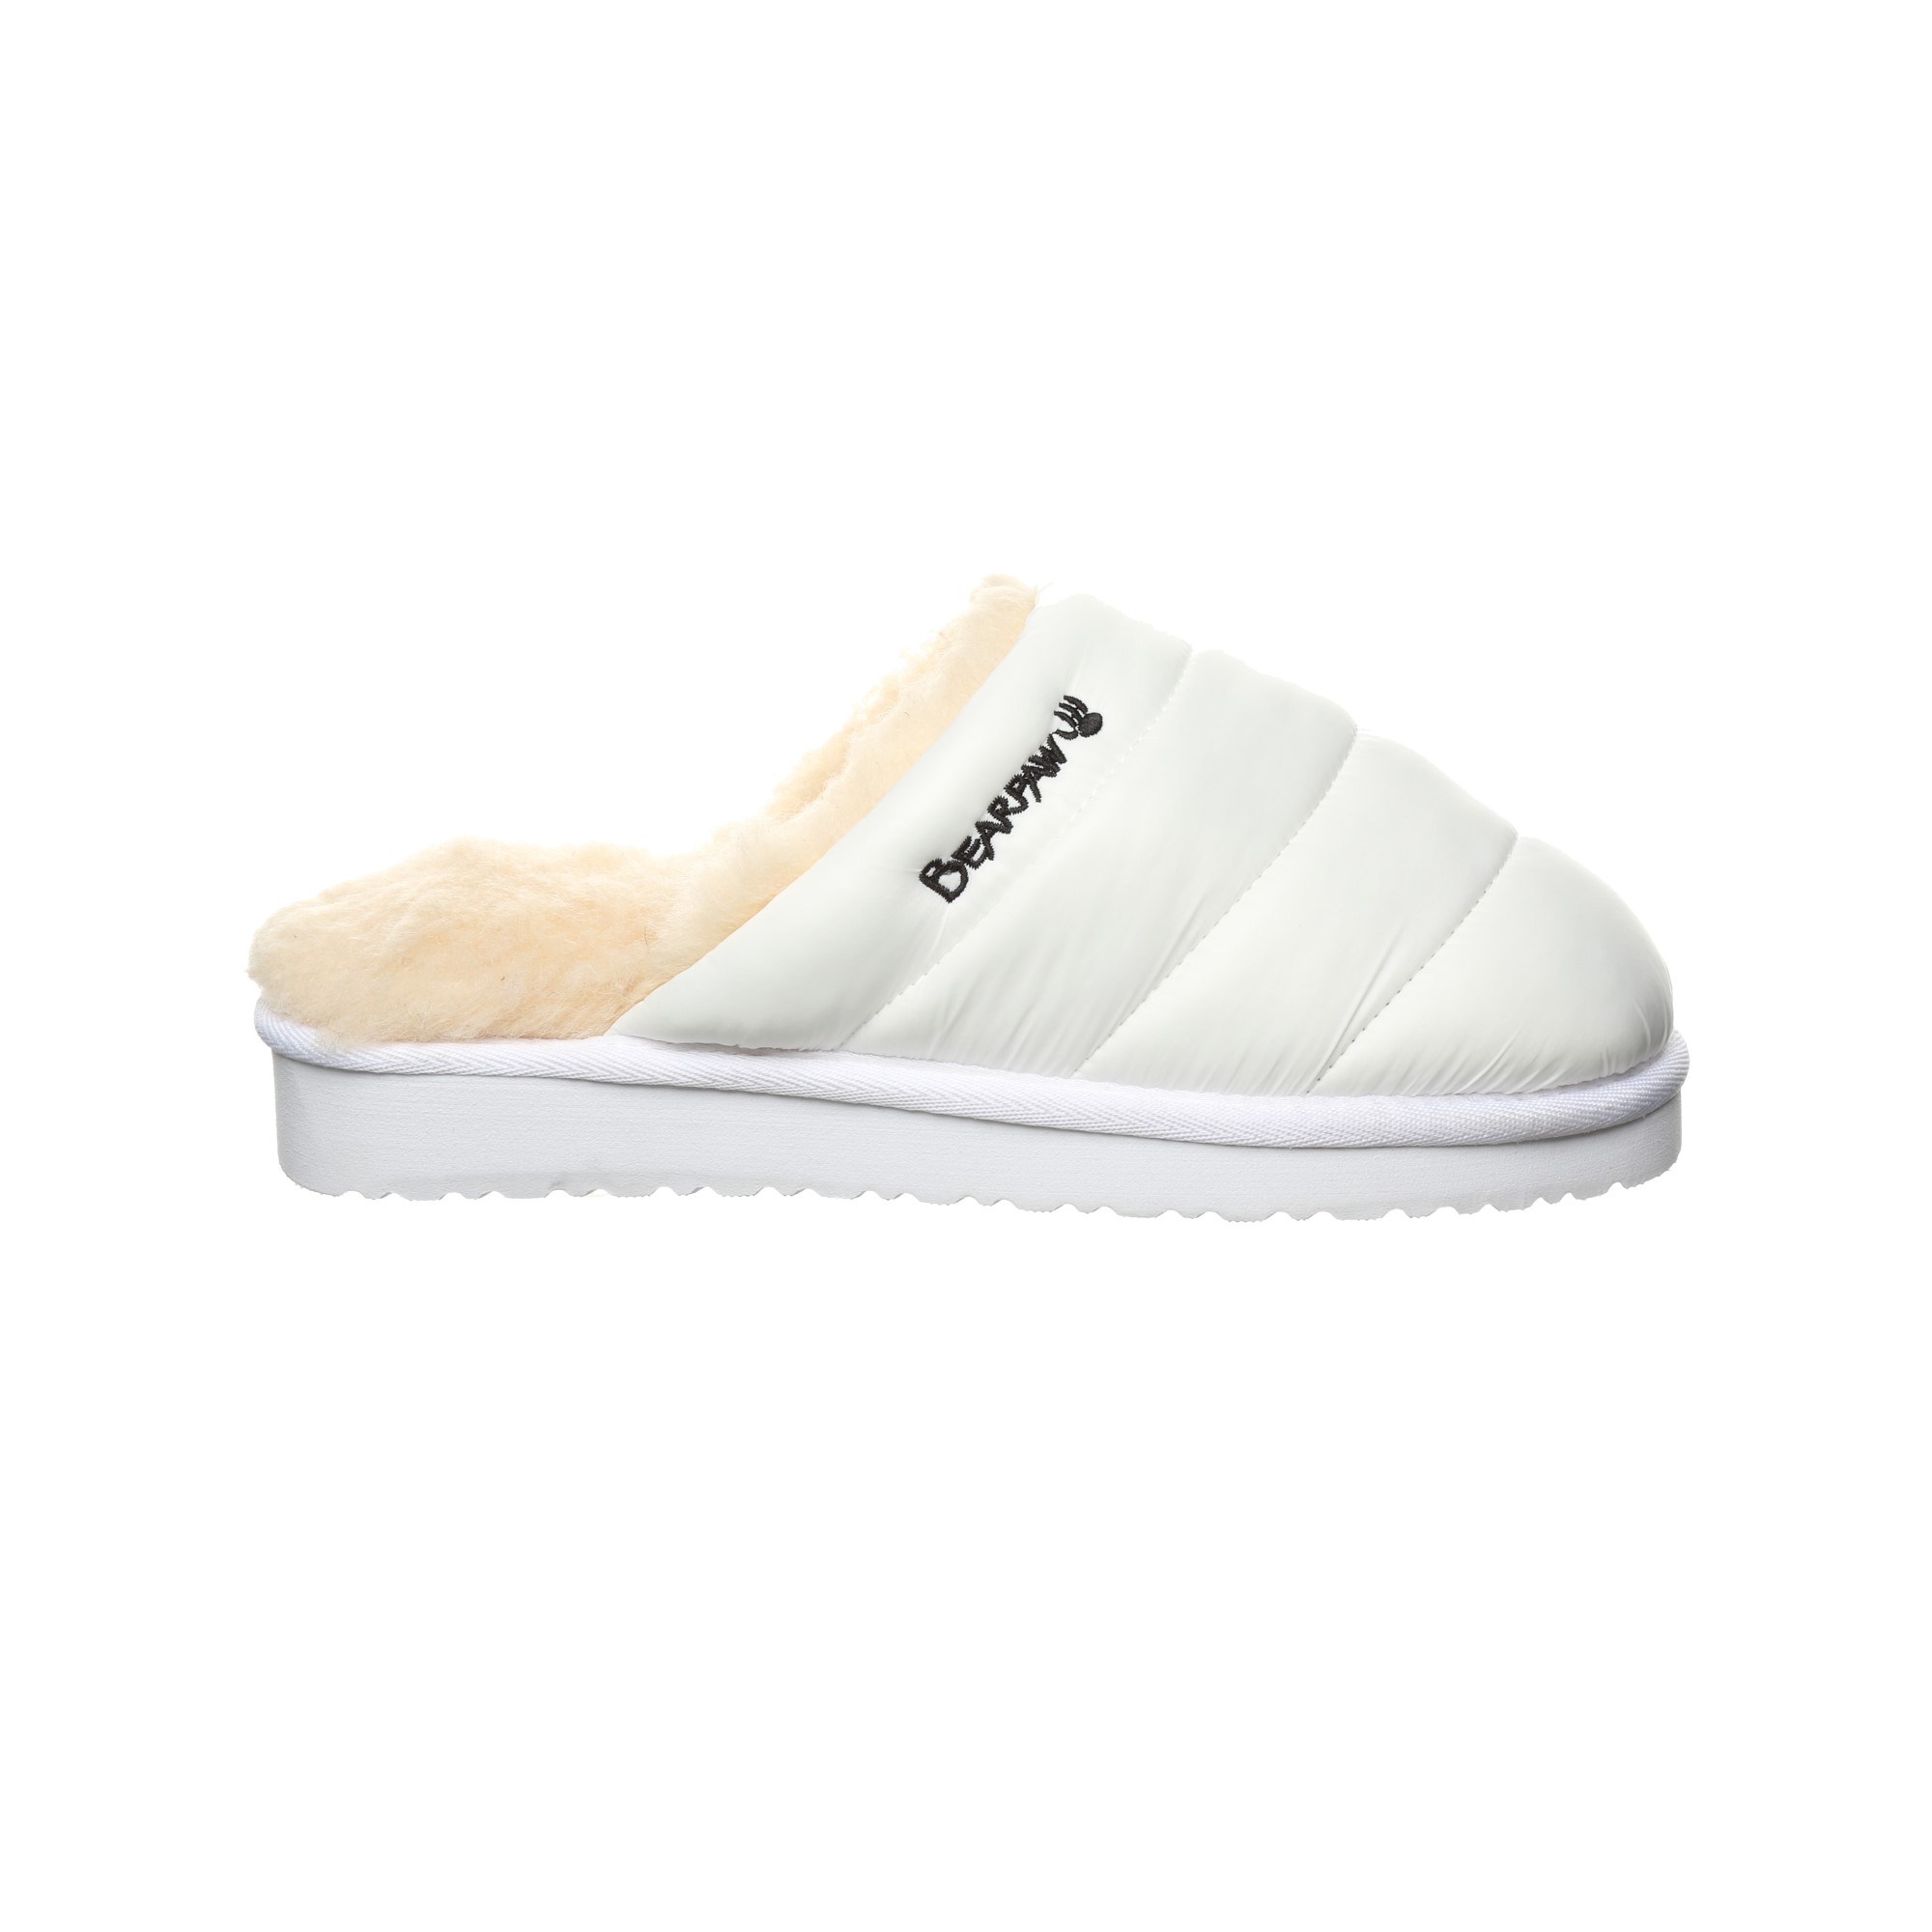 eZstep Womens Milly Slippers 